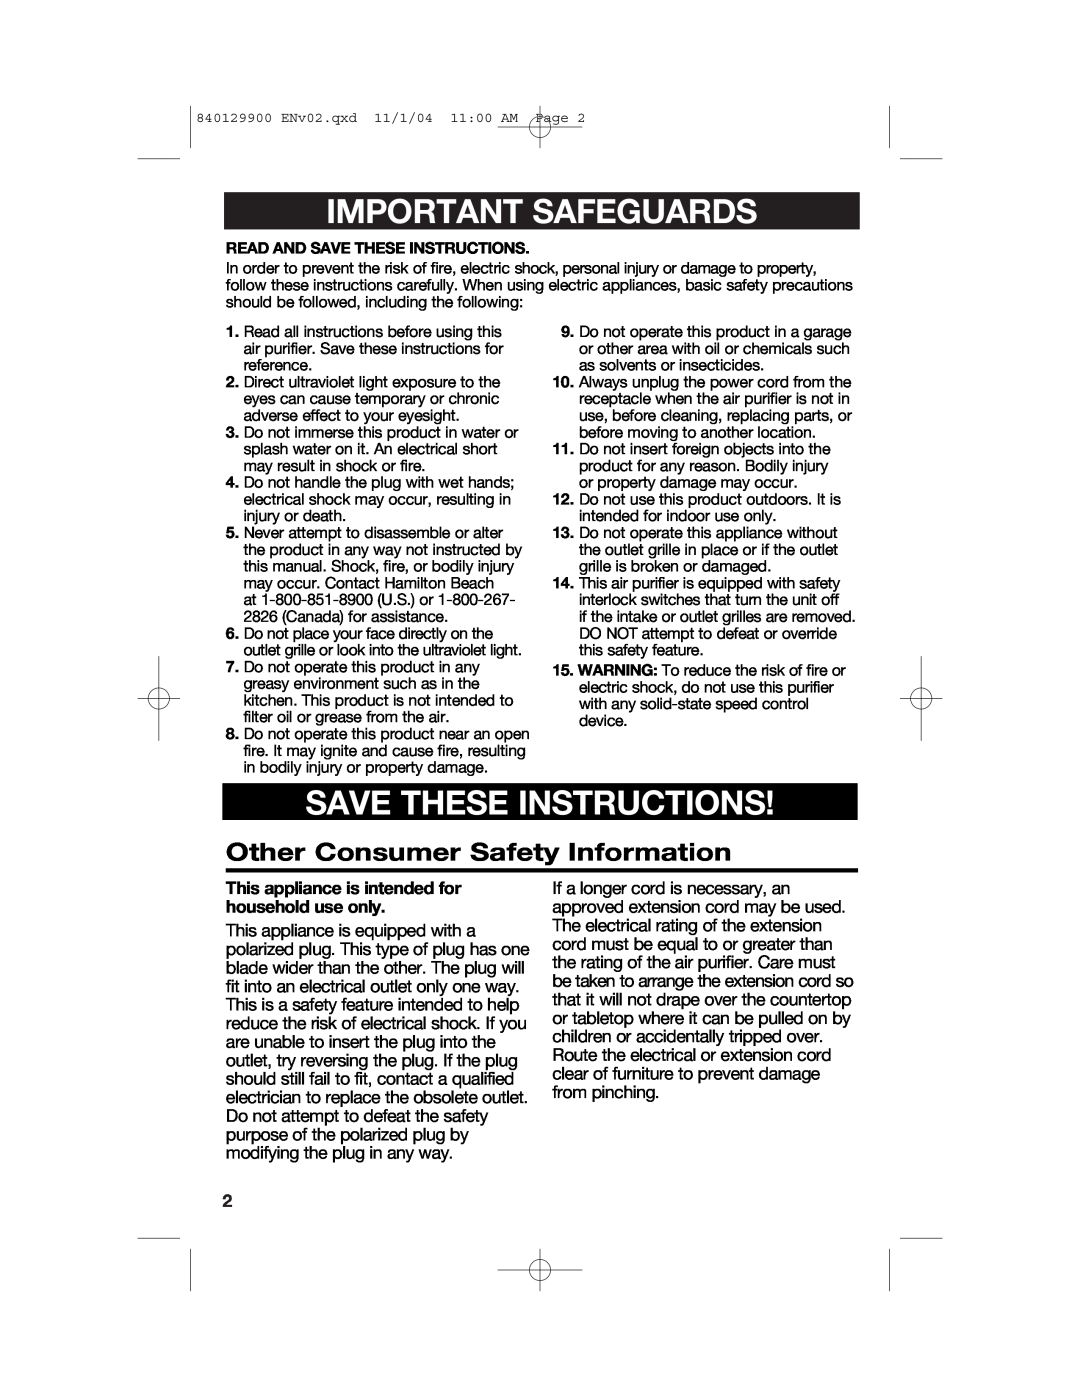 Hamilton Beach 04161, 04162, 04160 manual Important Safeguards, Save These Instructions, Other Consumer Safety Information 